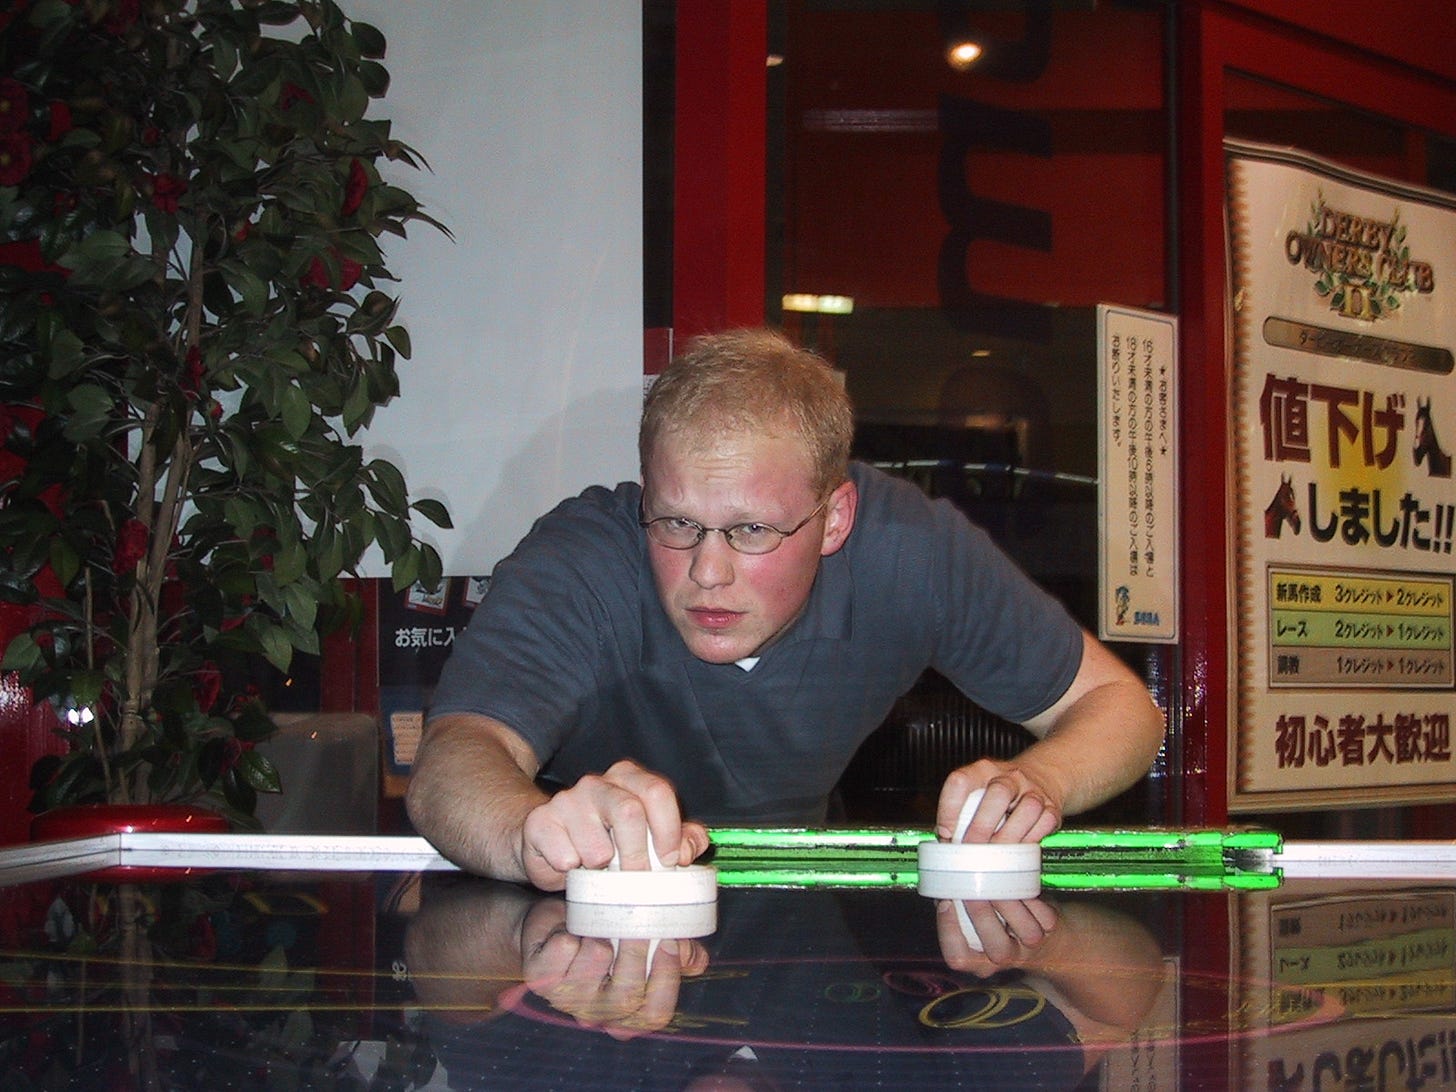 The author in 2003, playing air hockey at a Japanese arcade.